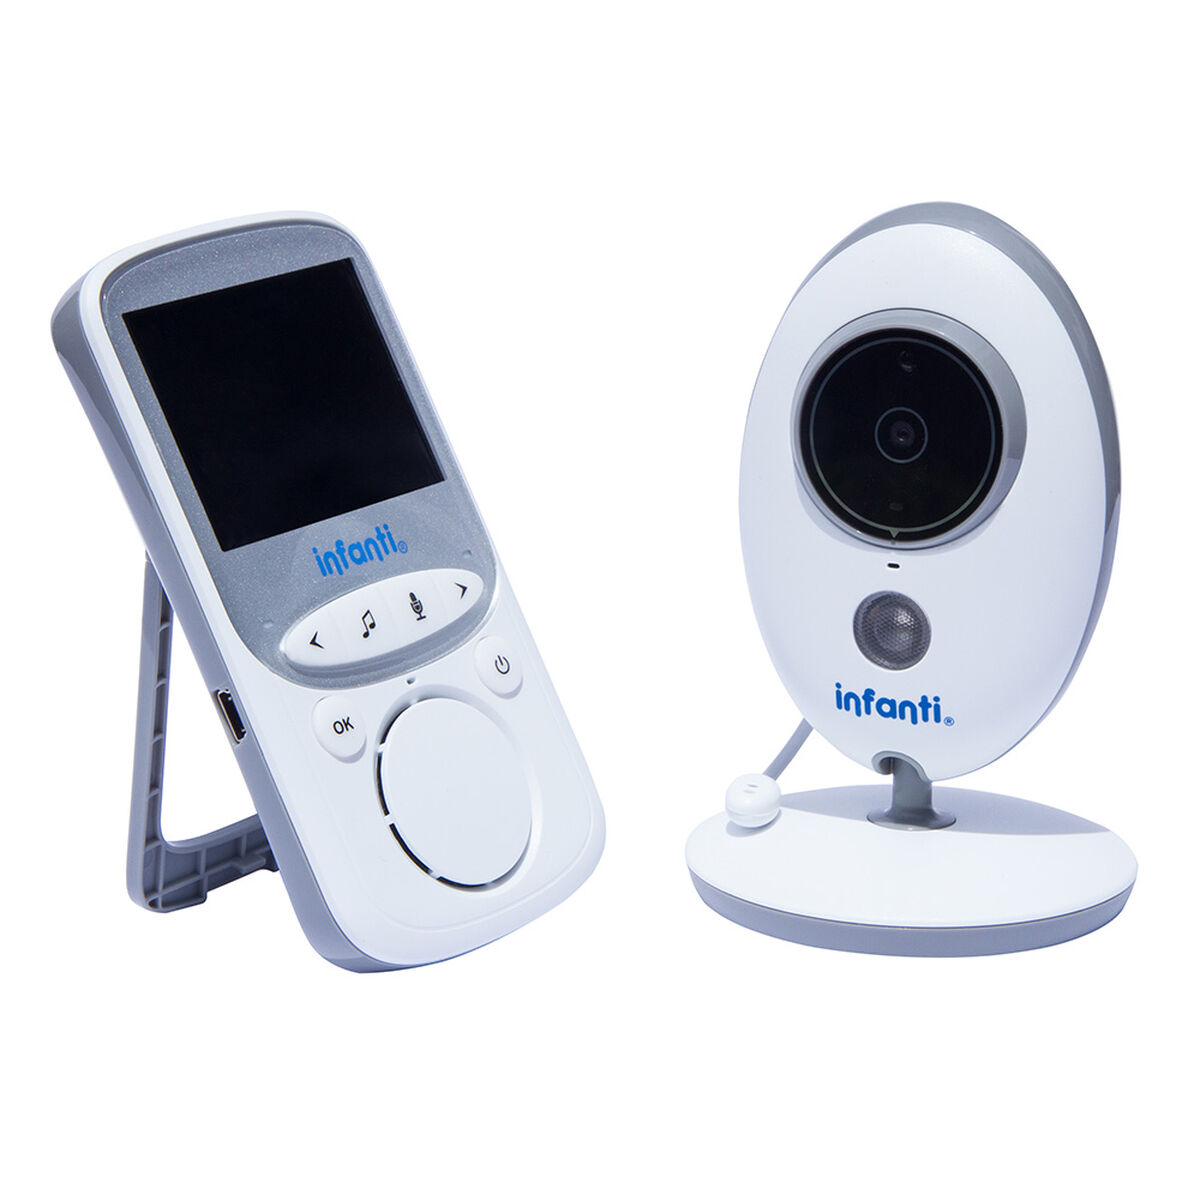 Video Monitor Digital View Contact 605